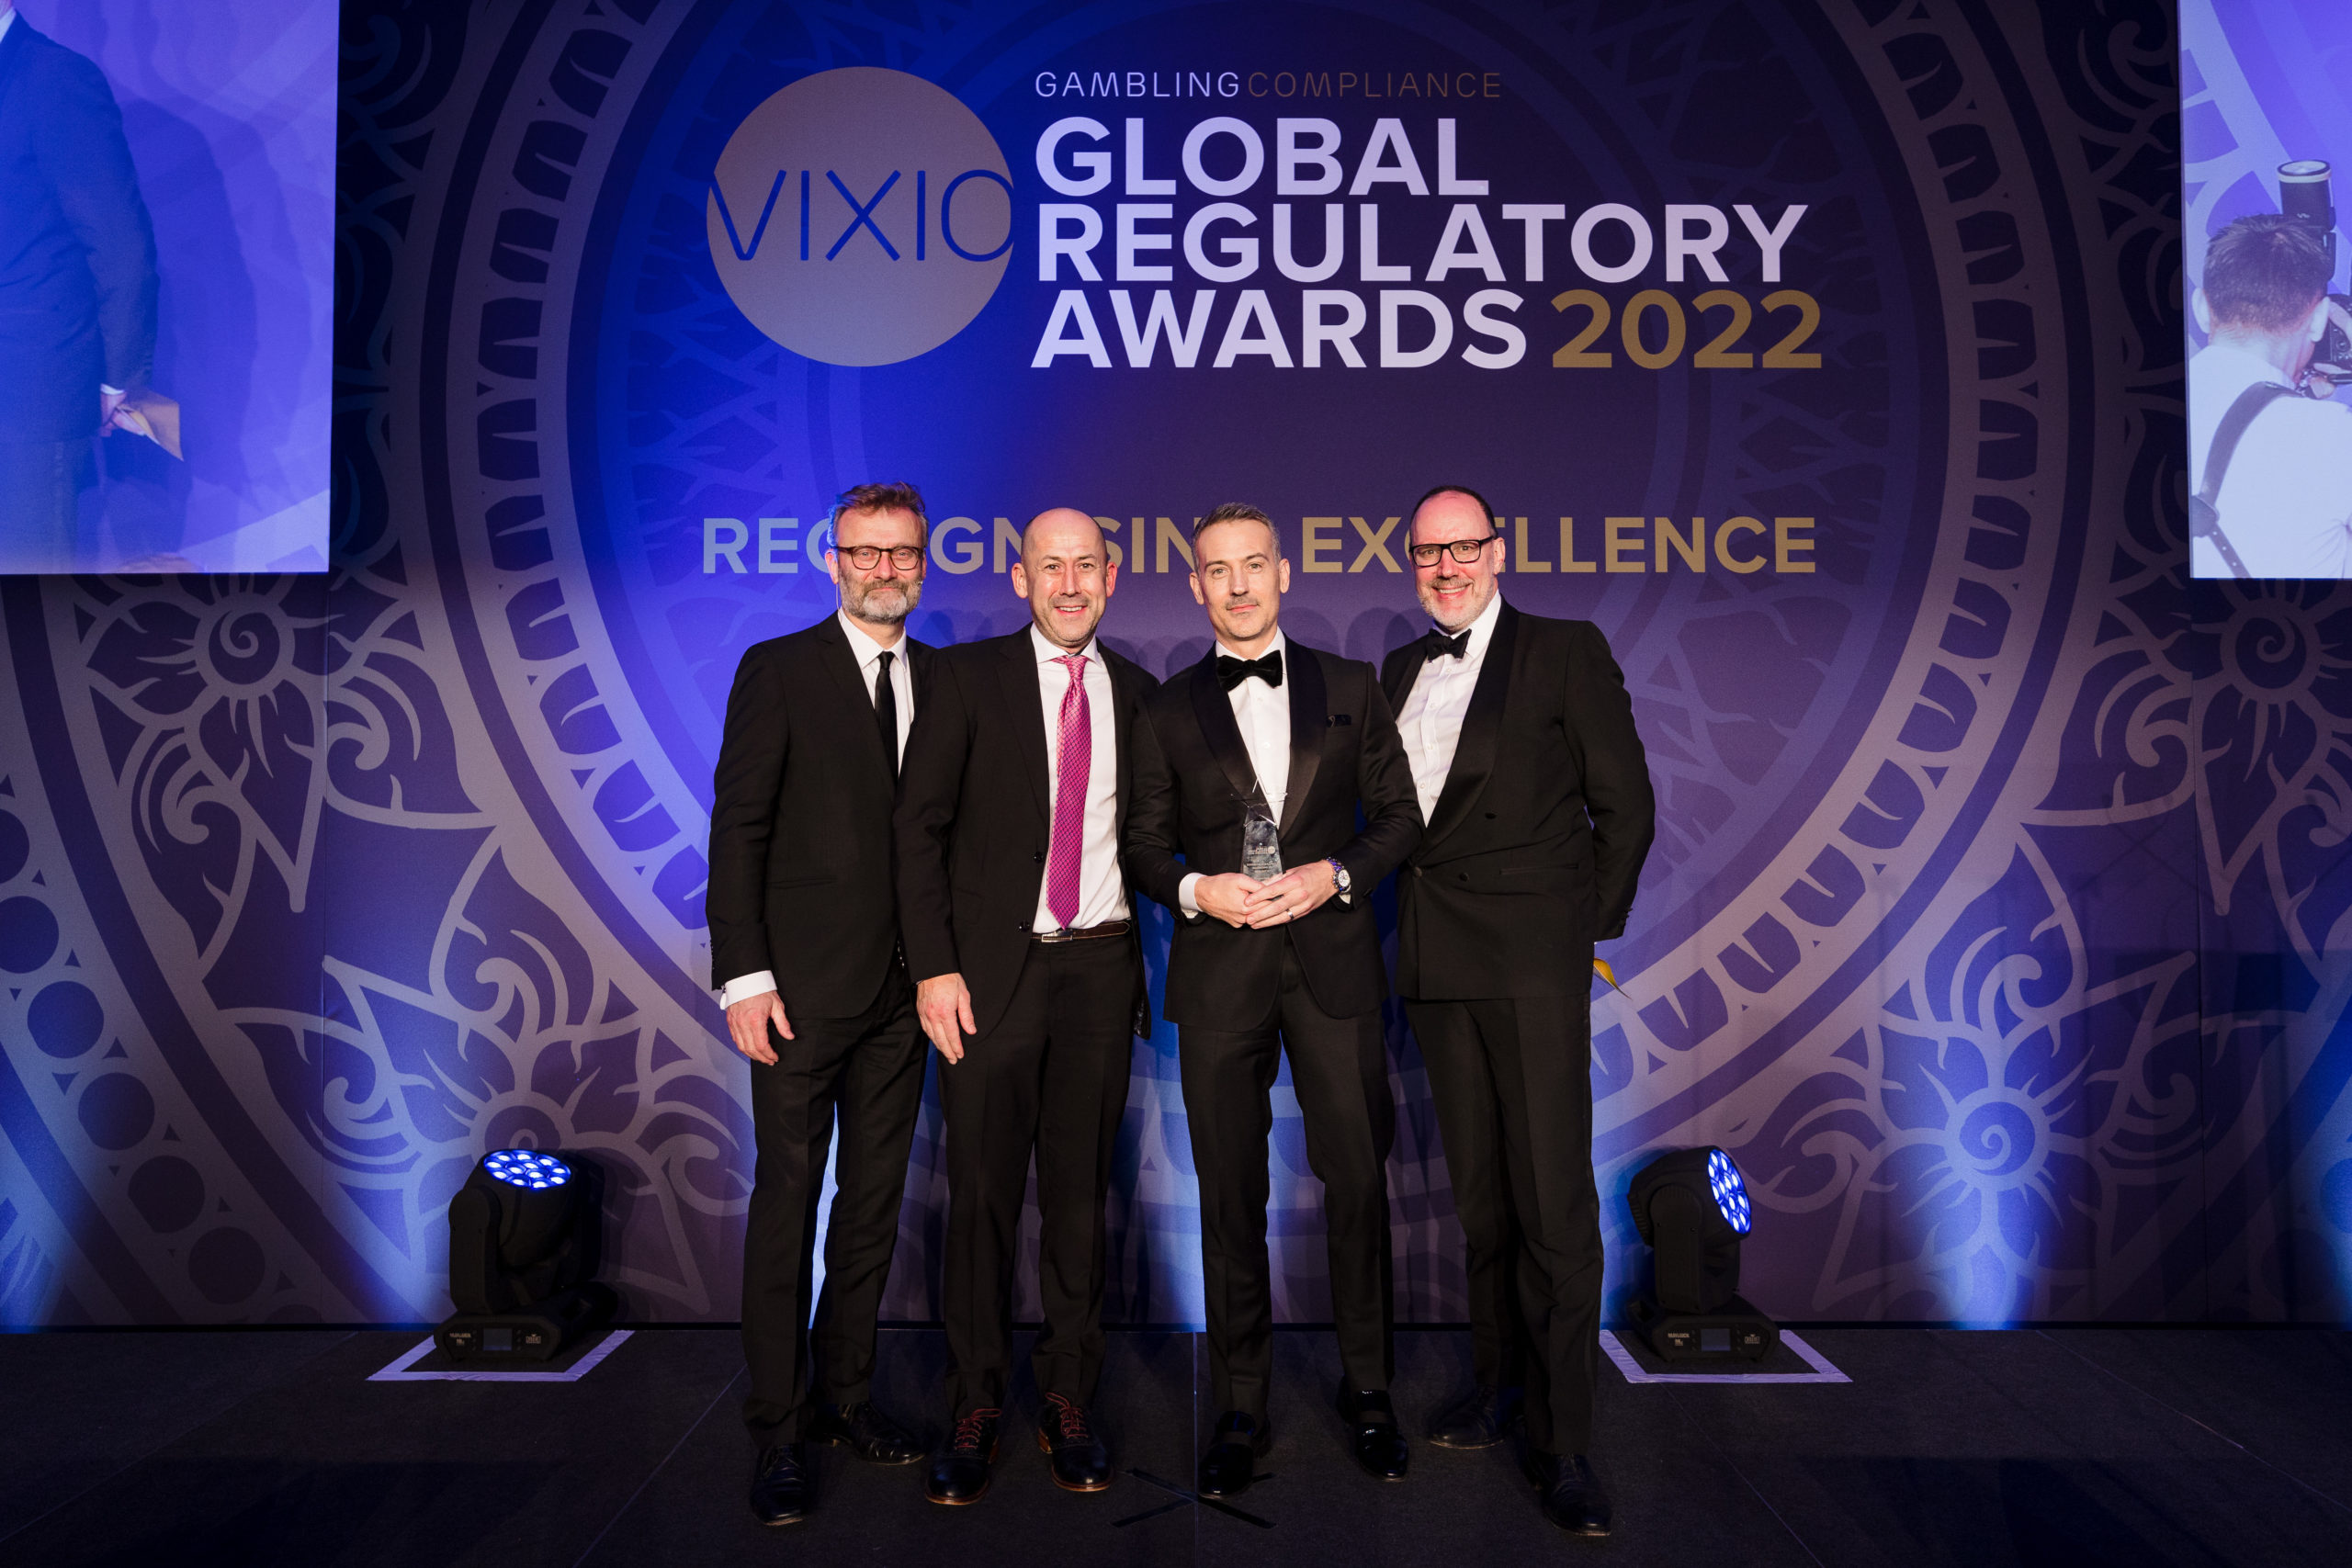 OneComply Wins Compliance Innovation of the Year Award from VIXIO GamblingCompliance